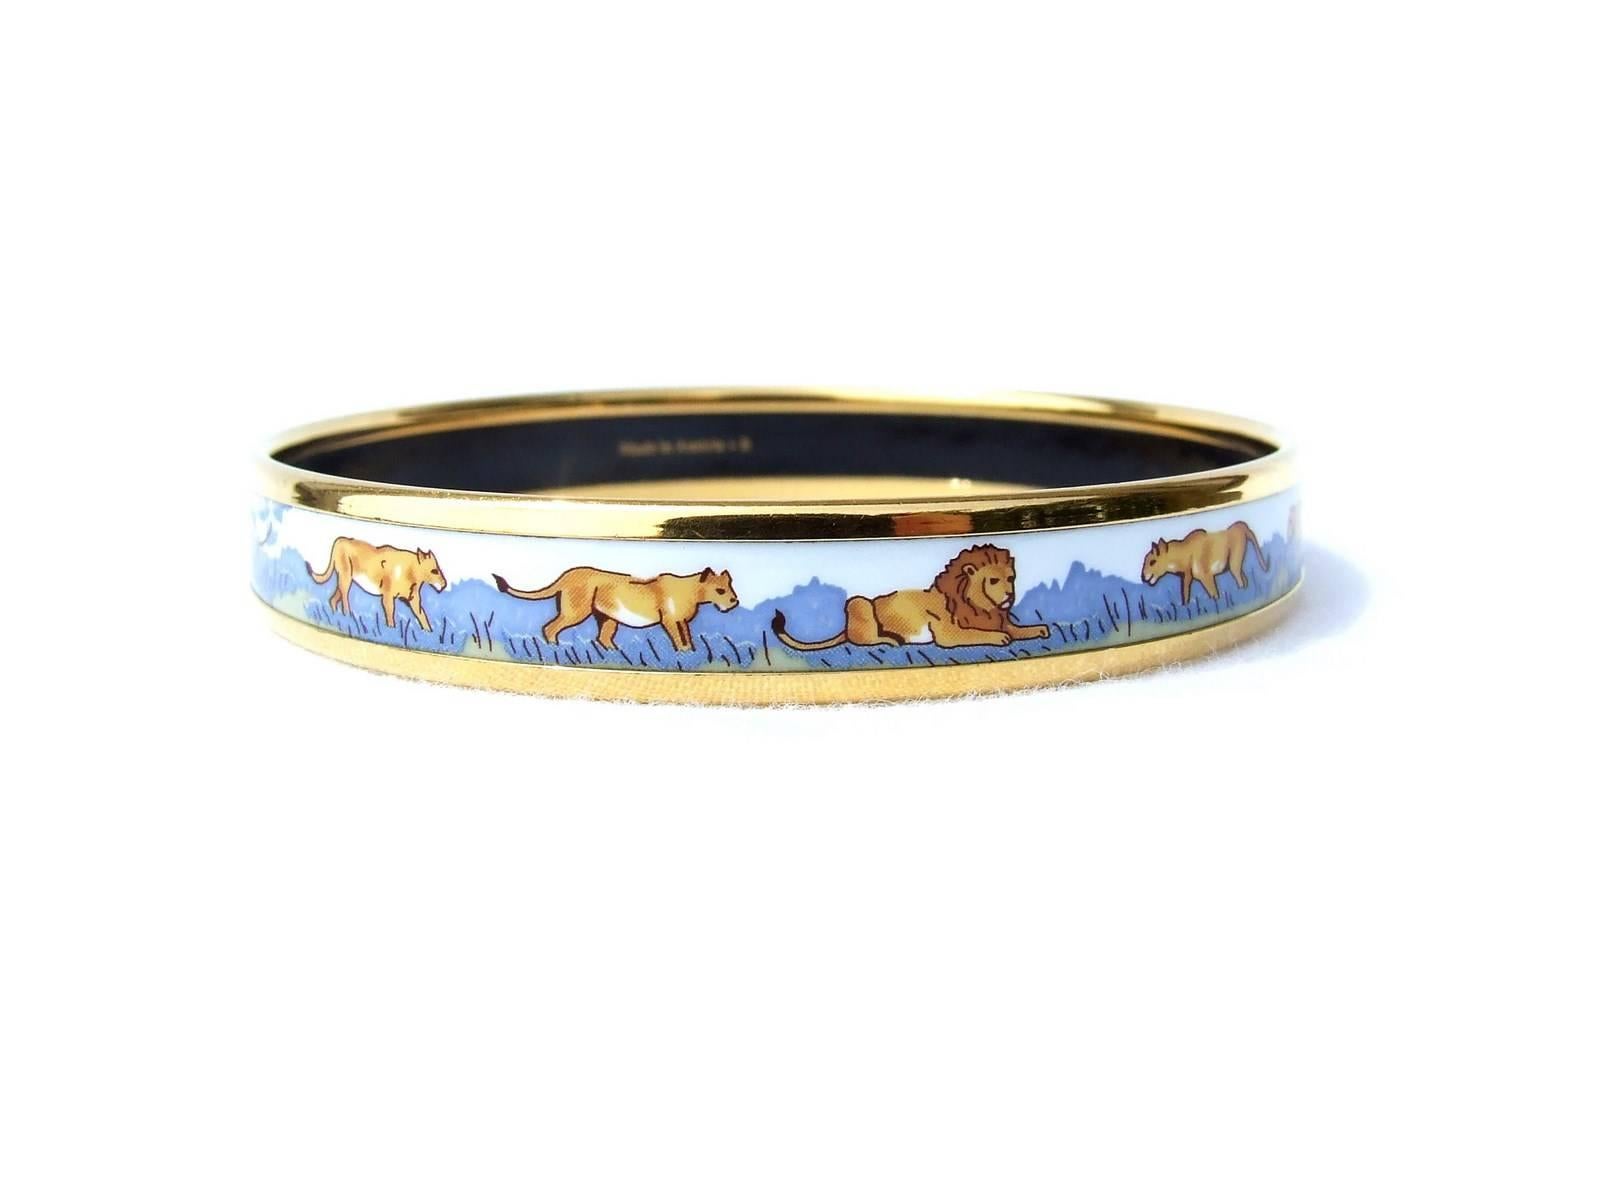 Beautiful authentic HERMES bracelet

Pattern: Lions and lionesses in Savannah

Made in Austria + B

Made of Printed Enamel and Gold Plated Hardware

Colorways: White, Green and Blue background, Camel Lions and Lionesses

